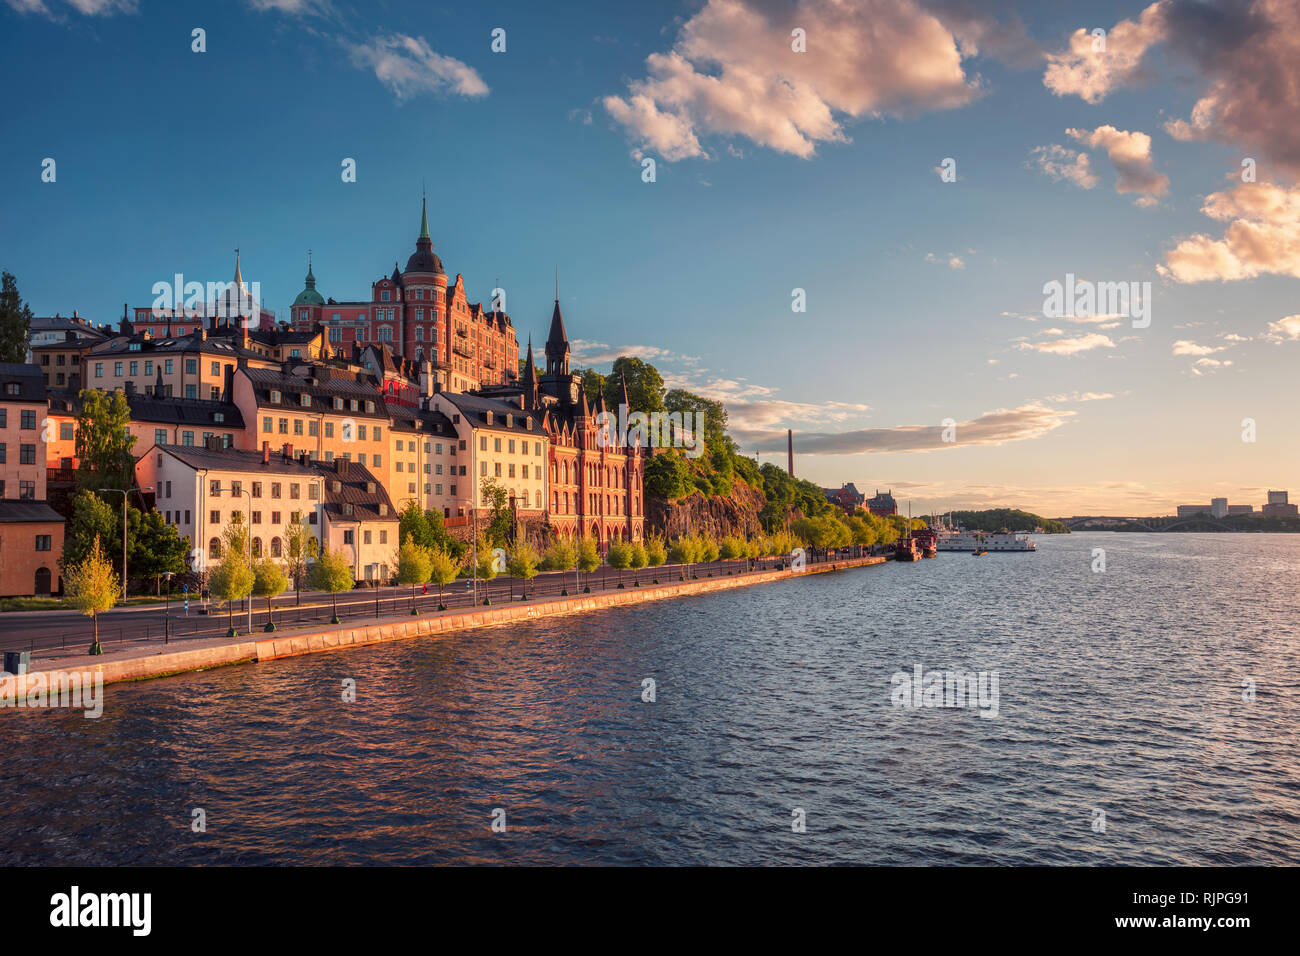 Stockholm. Cityscape image of old town Stockholm, Sweden during sunset. Stock Photo